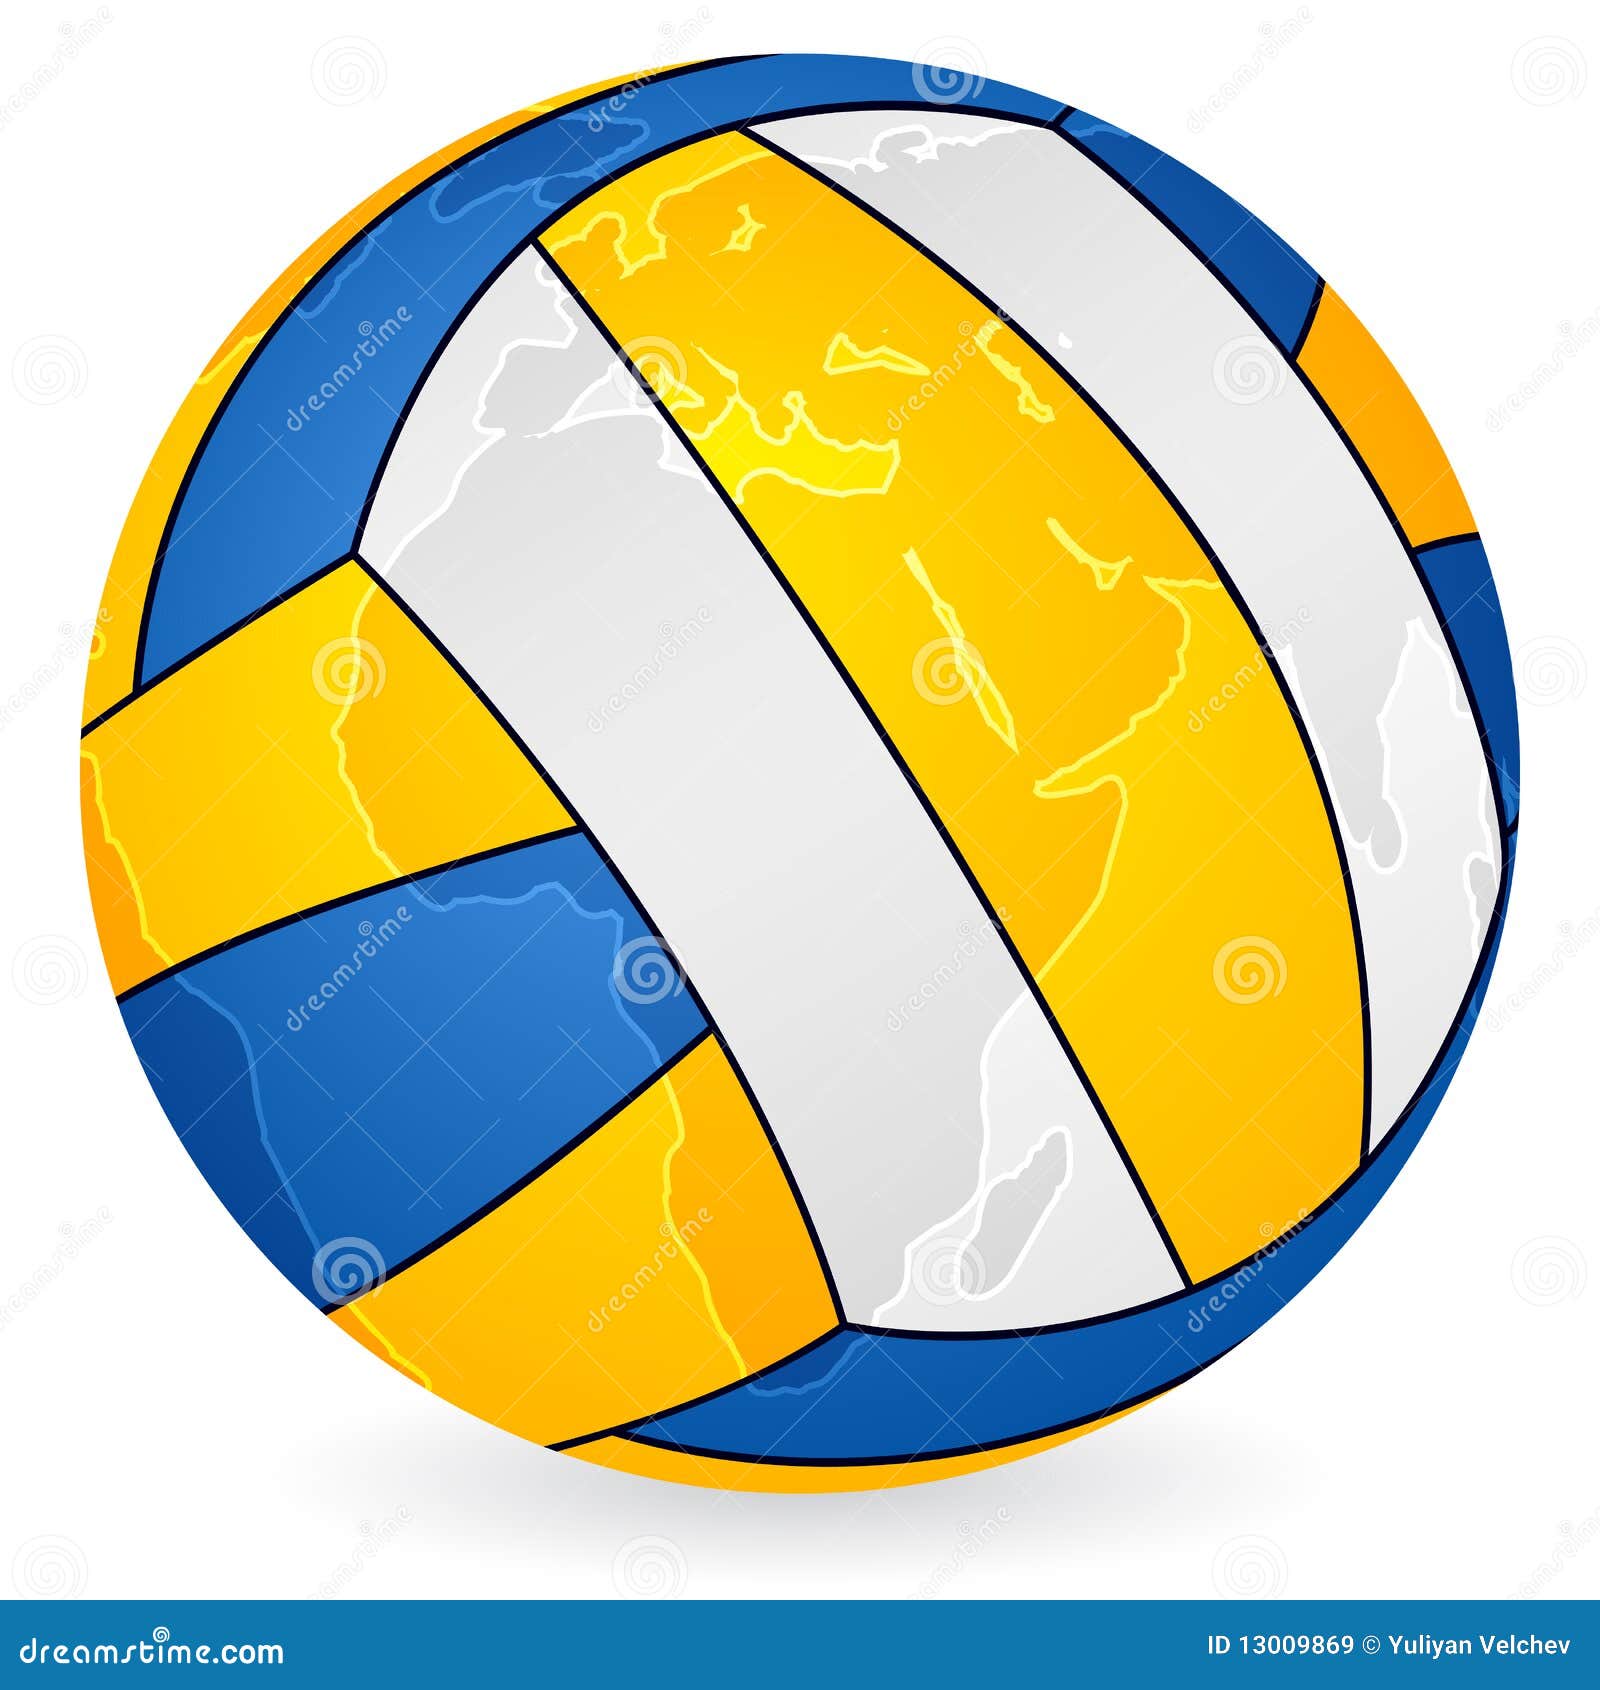 volleyball clipart no background - photo #47